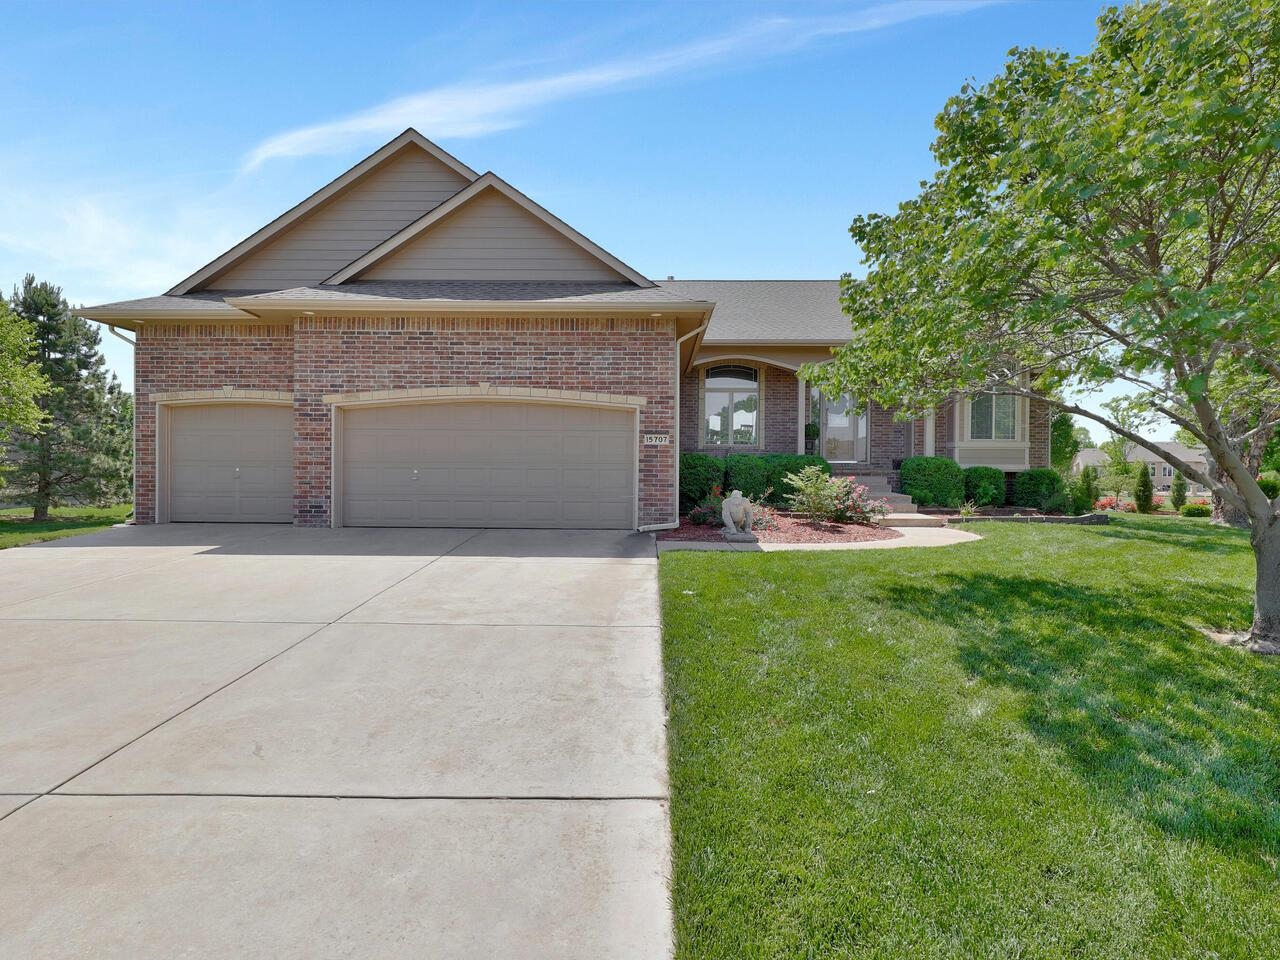 This ranch style split, open floor plan has tall ceilings with 3 bedrooms and 2 bathrooms on the mai